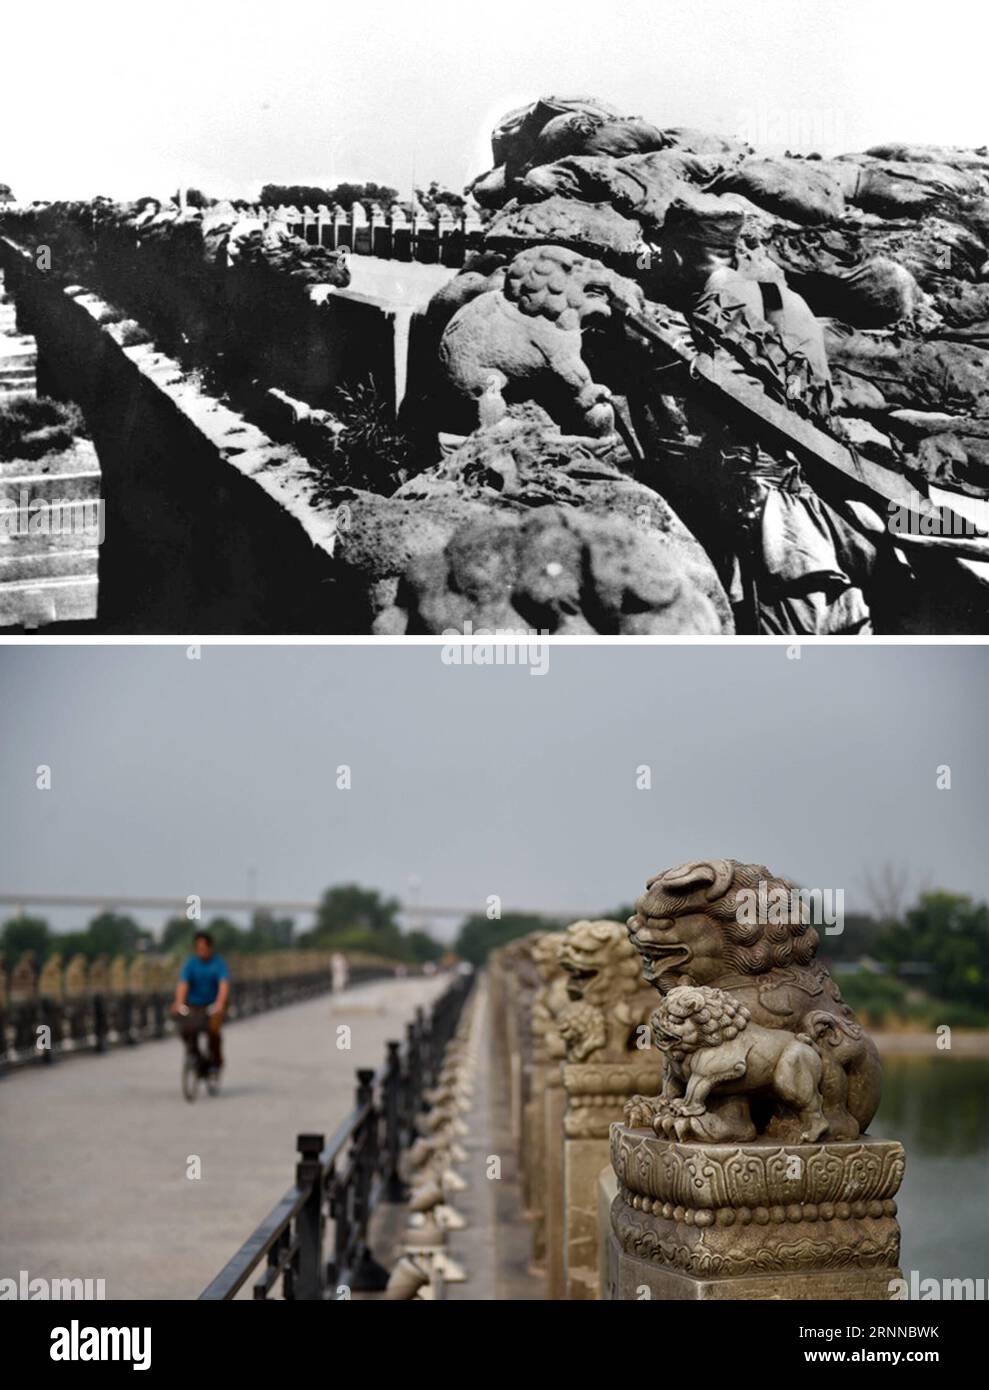 (170706) -- BEIJING, July 6, 2017 -- The upper part of the combined photo shows soldiers of the No. 29 Nationalists Corps fighting hard to resist Japanese invaders at Lugou Bridge (file). The lower part taken by shows tourists visiting Lugou Bridge in Beijing on July 3, 2017. China was the first nation to fight against fascist forces. The struggle started on September 18, 1931, when Japanese troops began their invasion of northeast China. It was intensified when Japan s full-scale invasion began after a crucial access point to Beijing, Lugou Bridge, also known as Marco Polo Bridge, was attacke Stock Photo